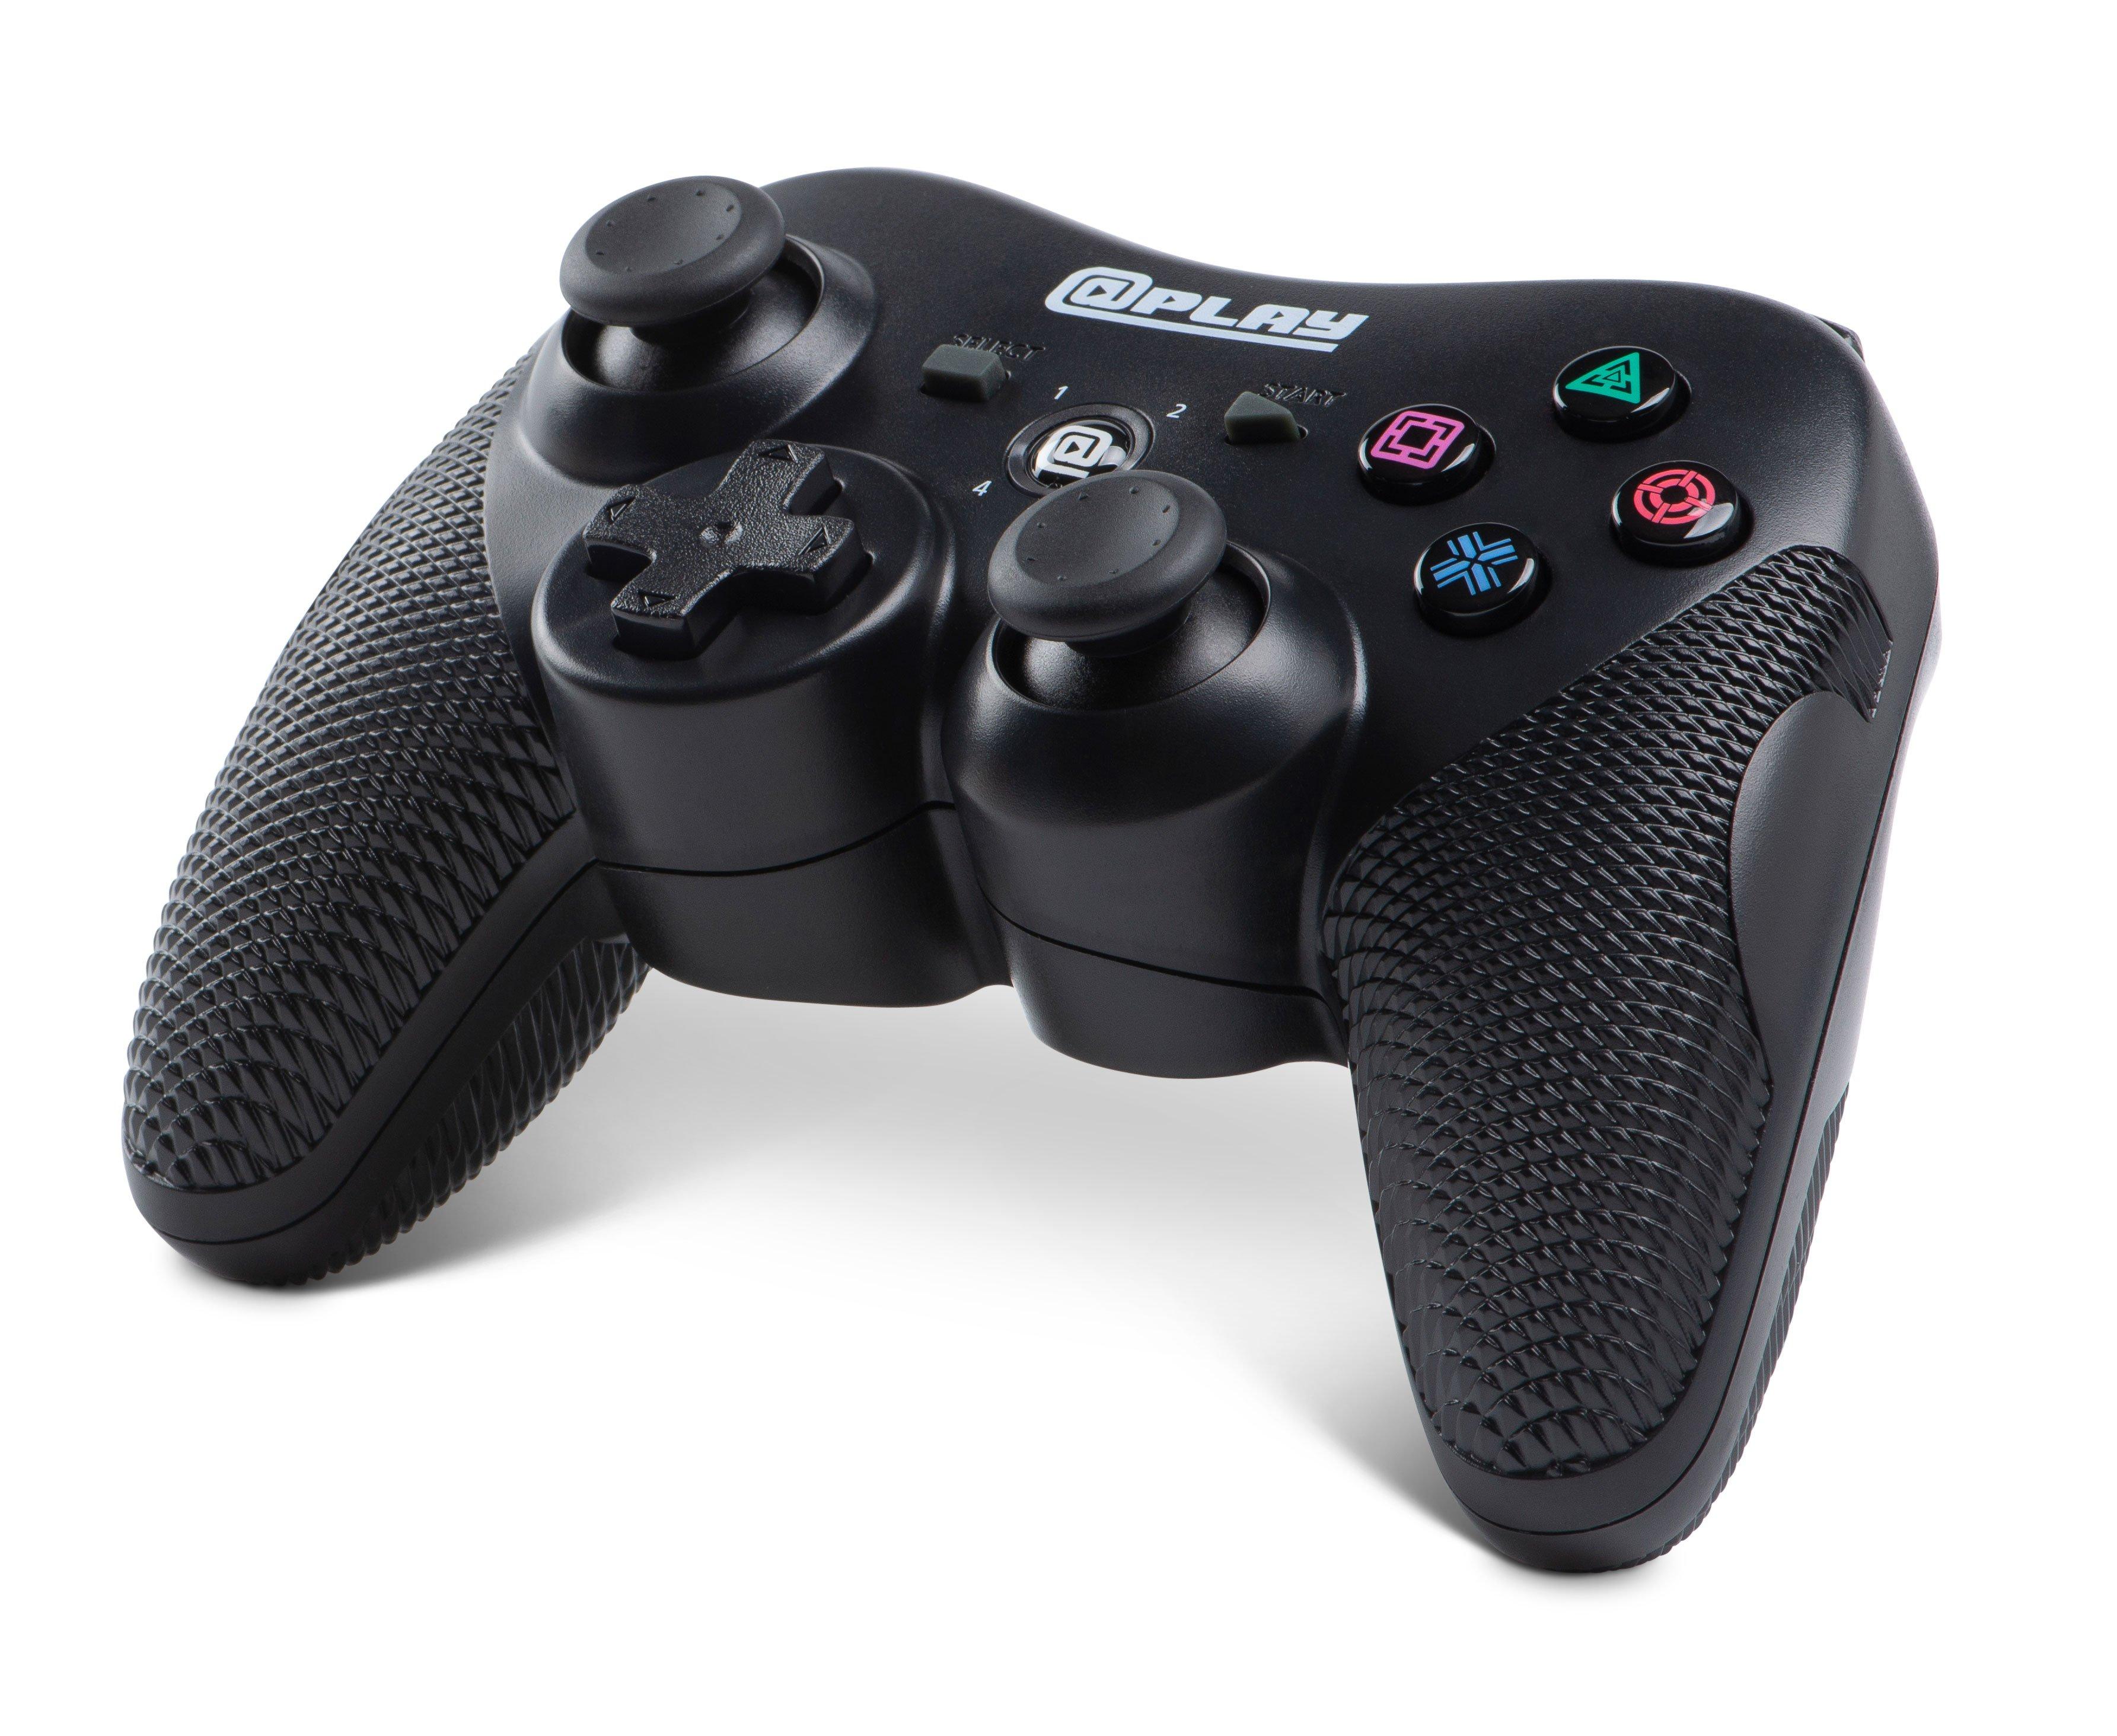 ps3 controller price at game